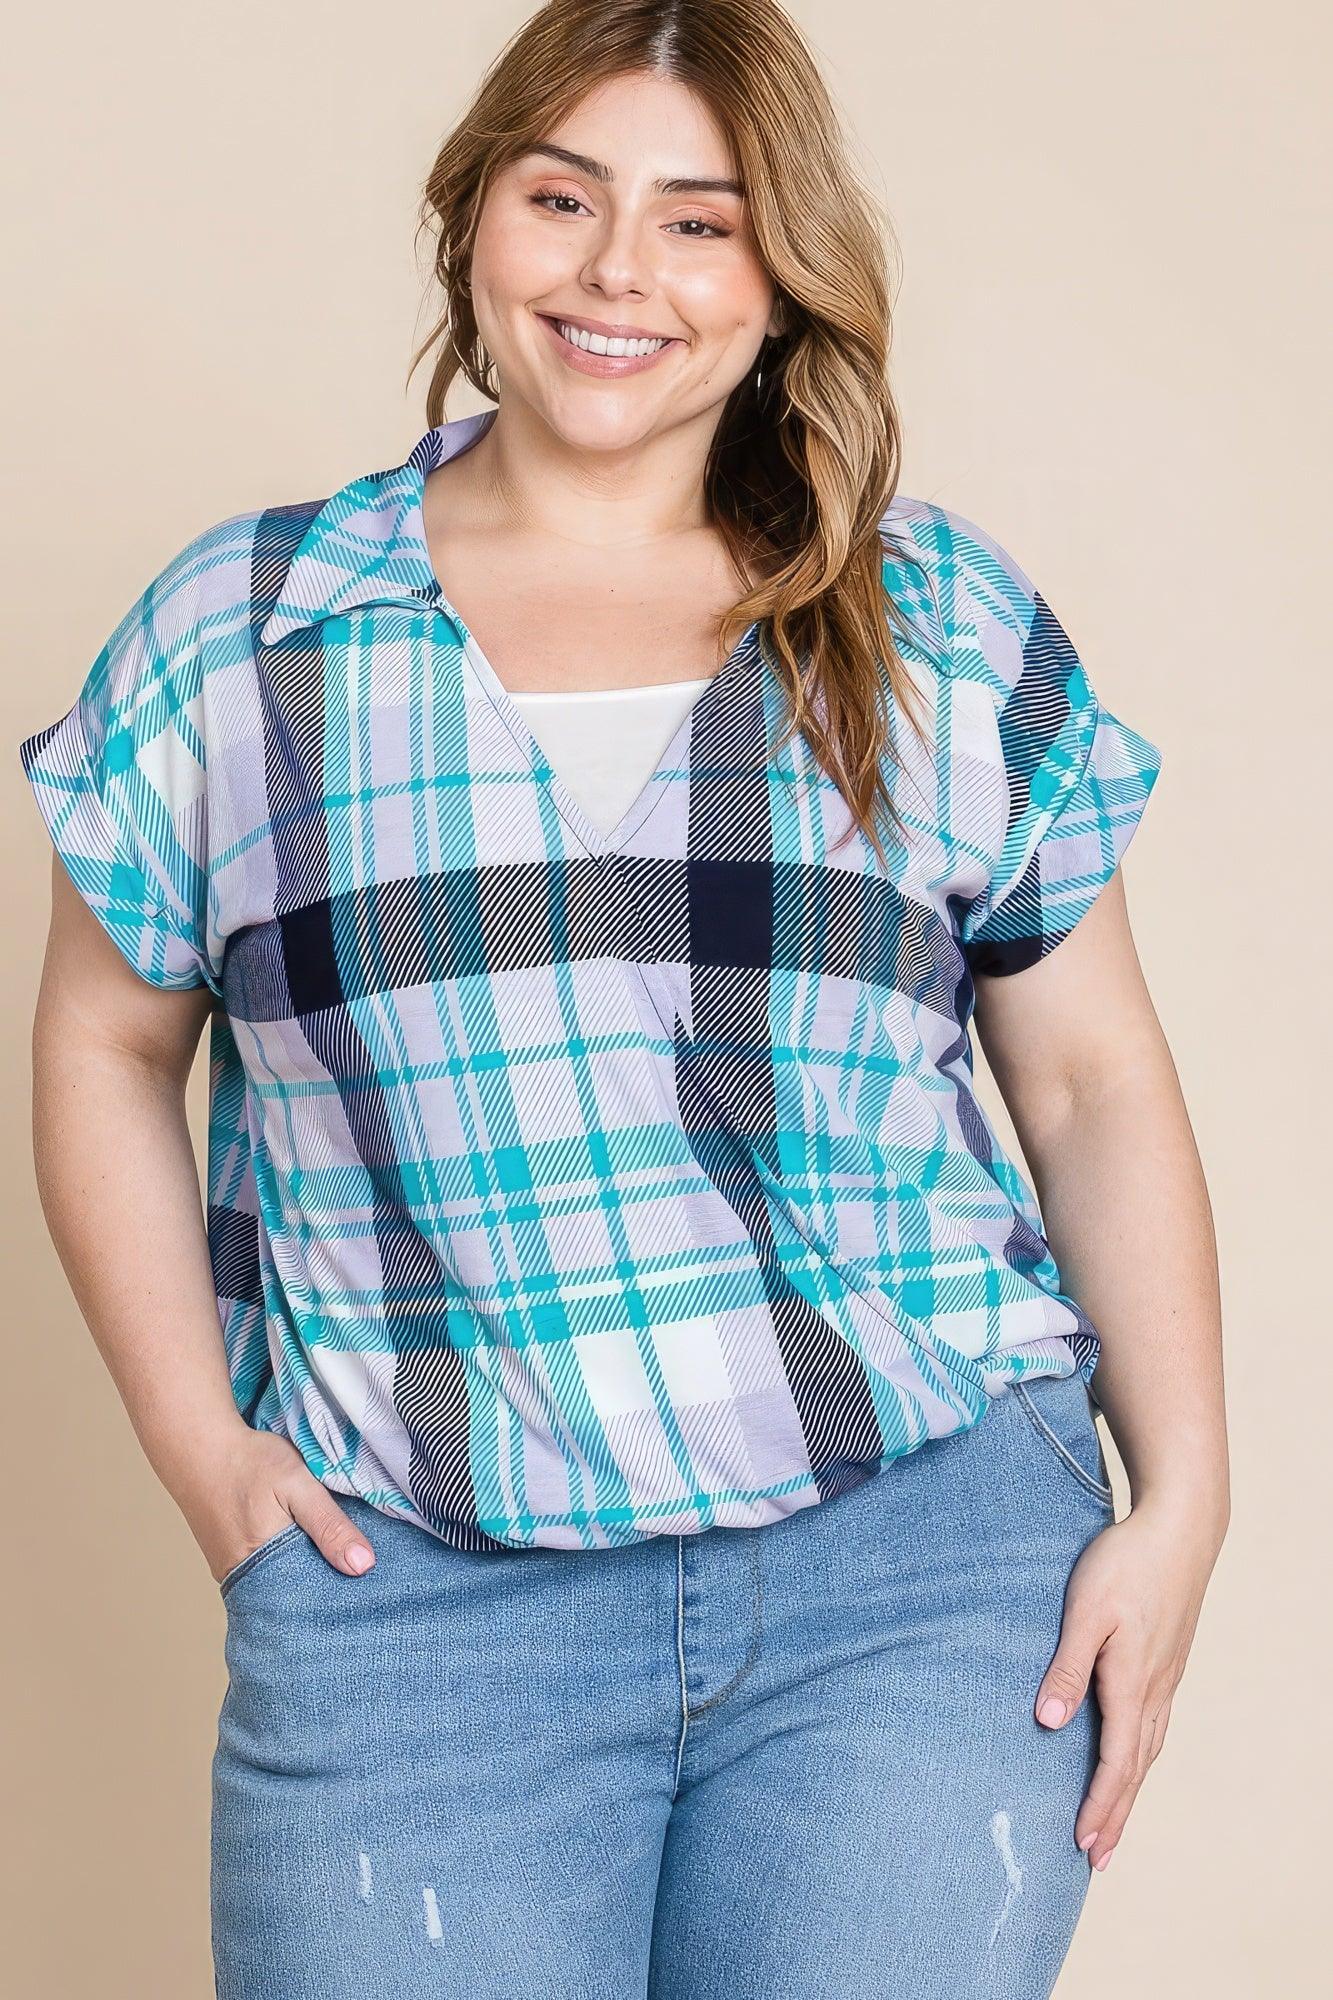 Women's Shirts Plus Size Multi Colored Check Printed Casual Collared Short Sleeve Top